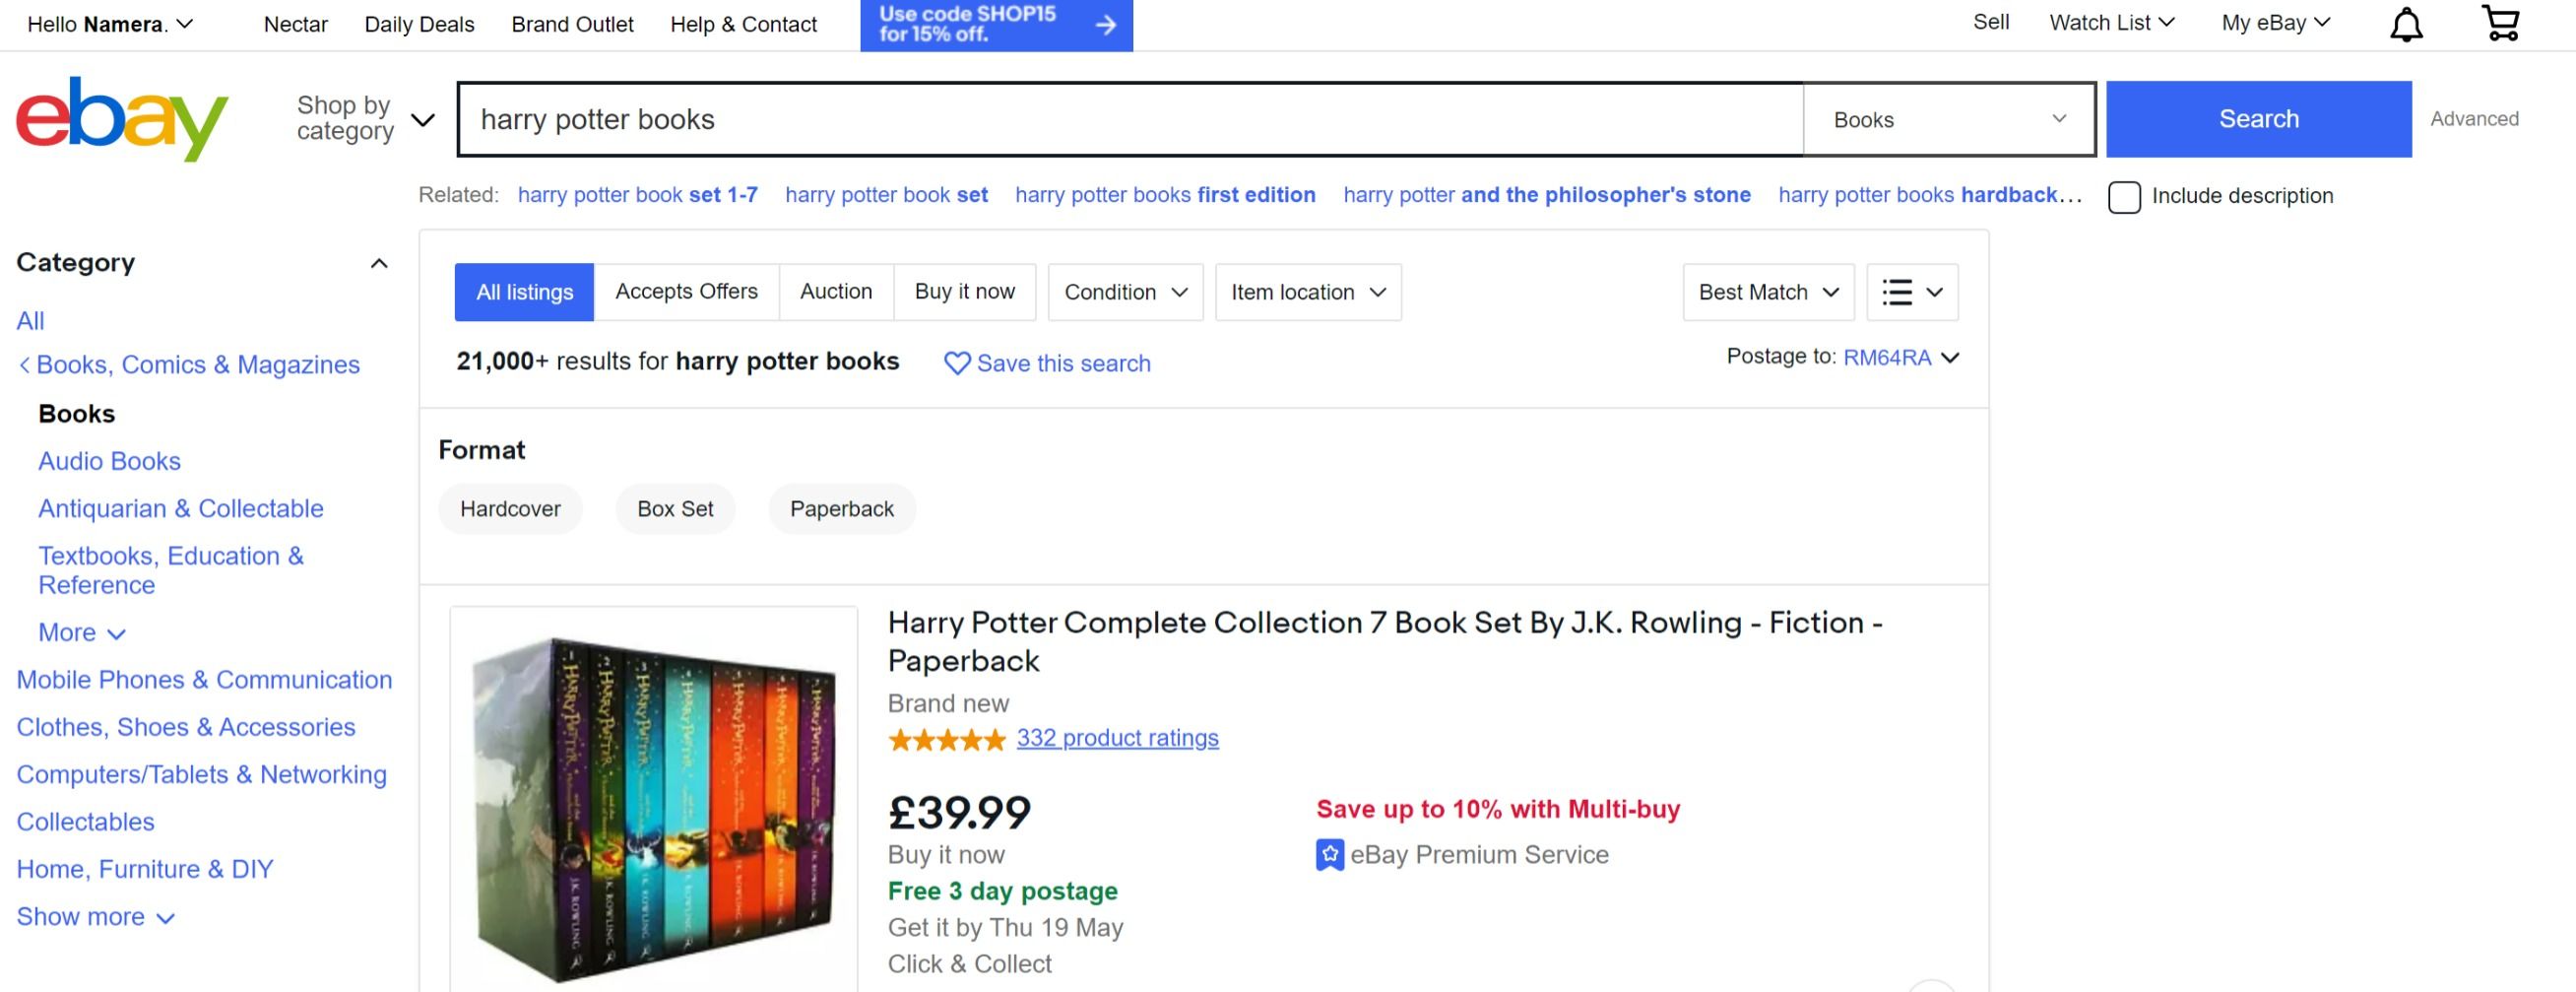 Results page on eBay for Harry Potter books